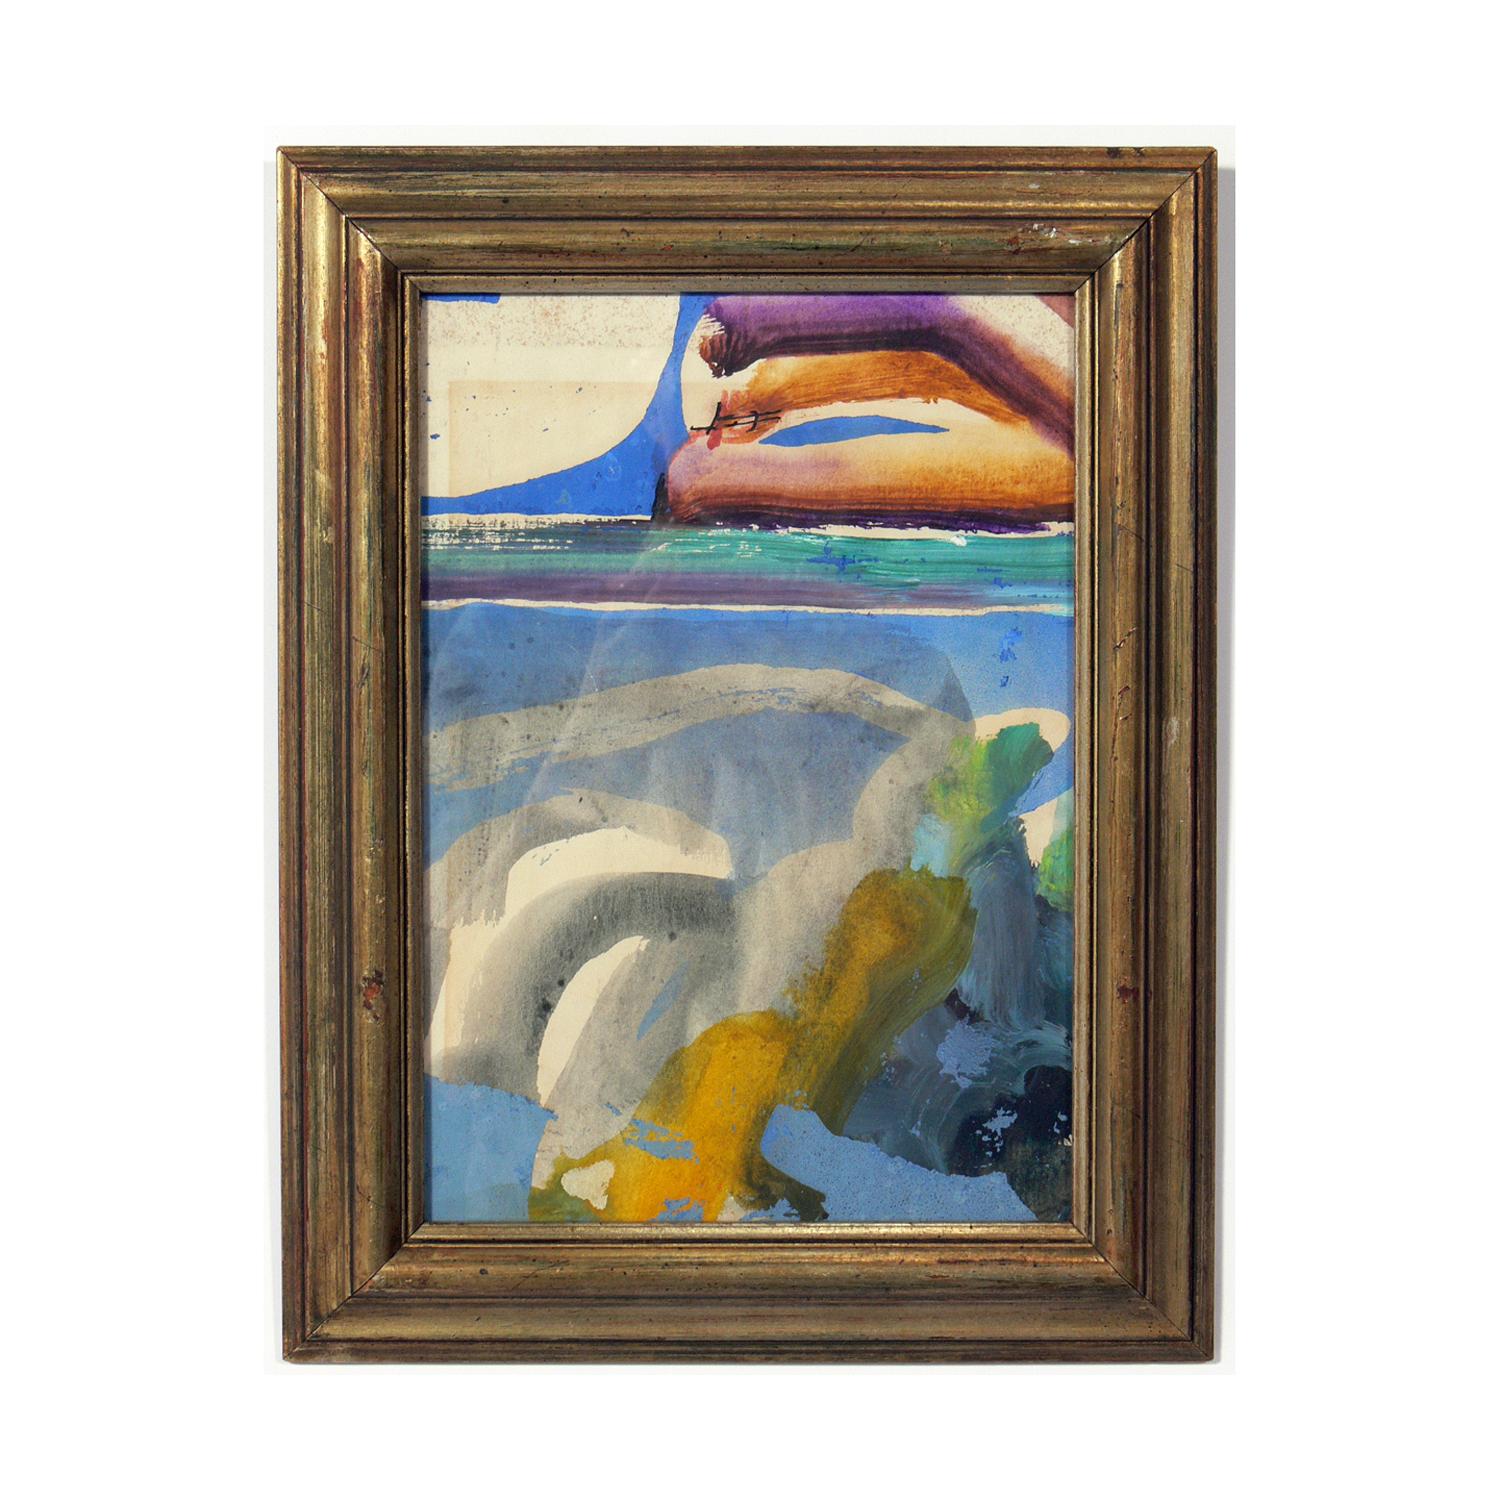 Selection of modern art or gallery wall, circa 1950s-1960s. From left to right, they are:
1) Modernist seascape painting, artist unknown, circa 1950s. It measures: 12